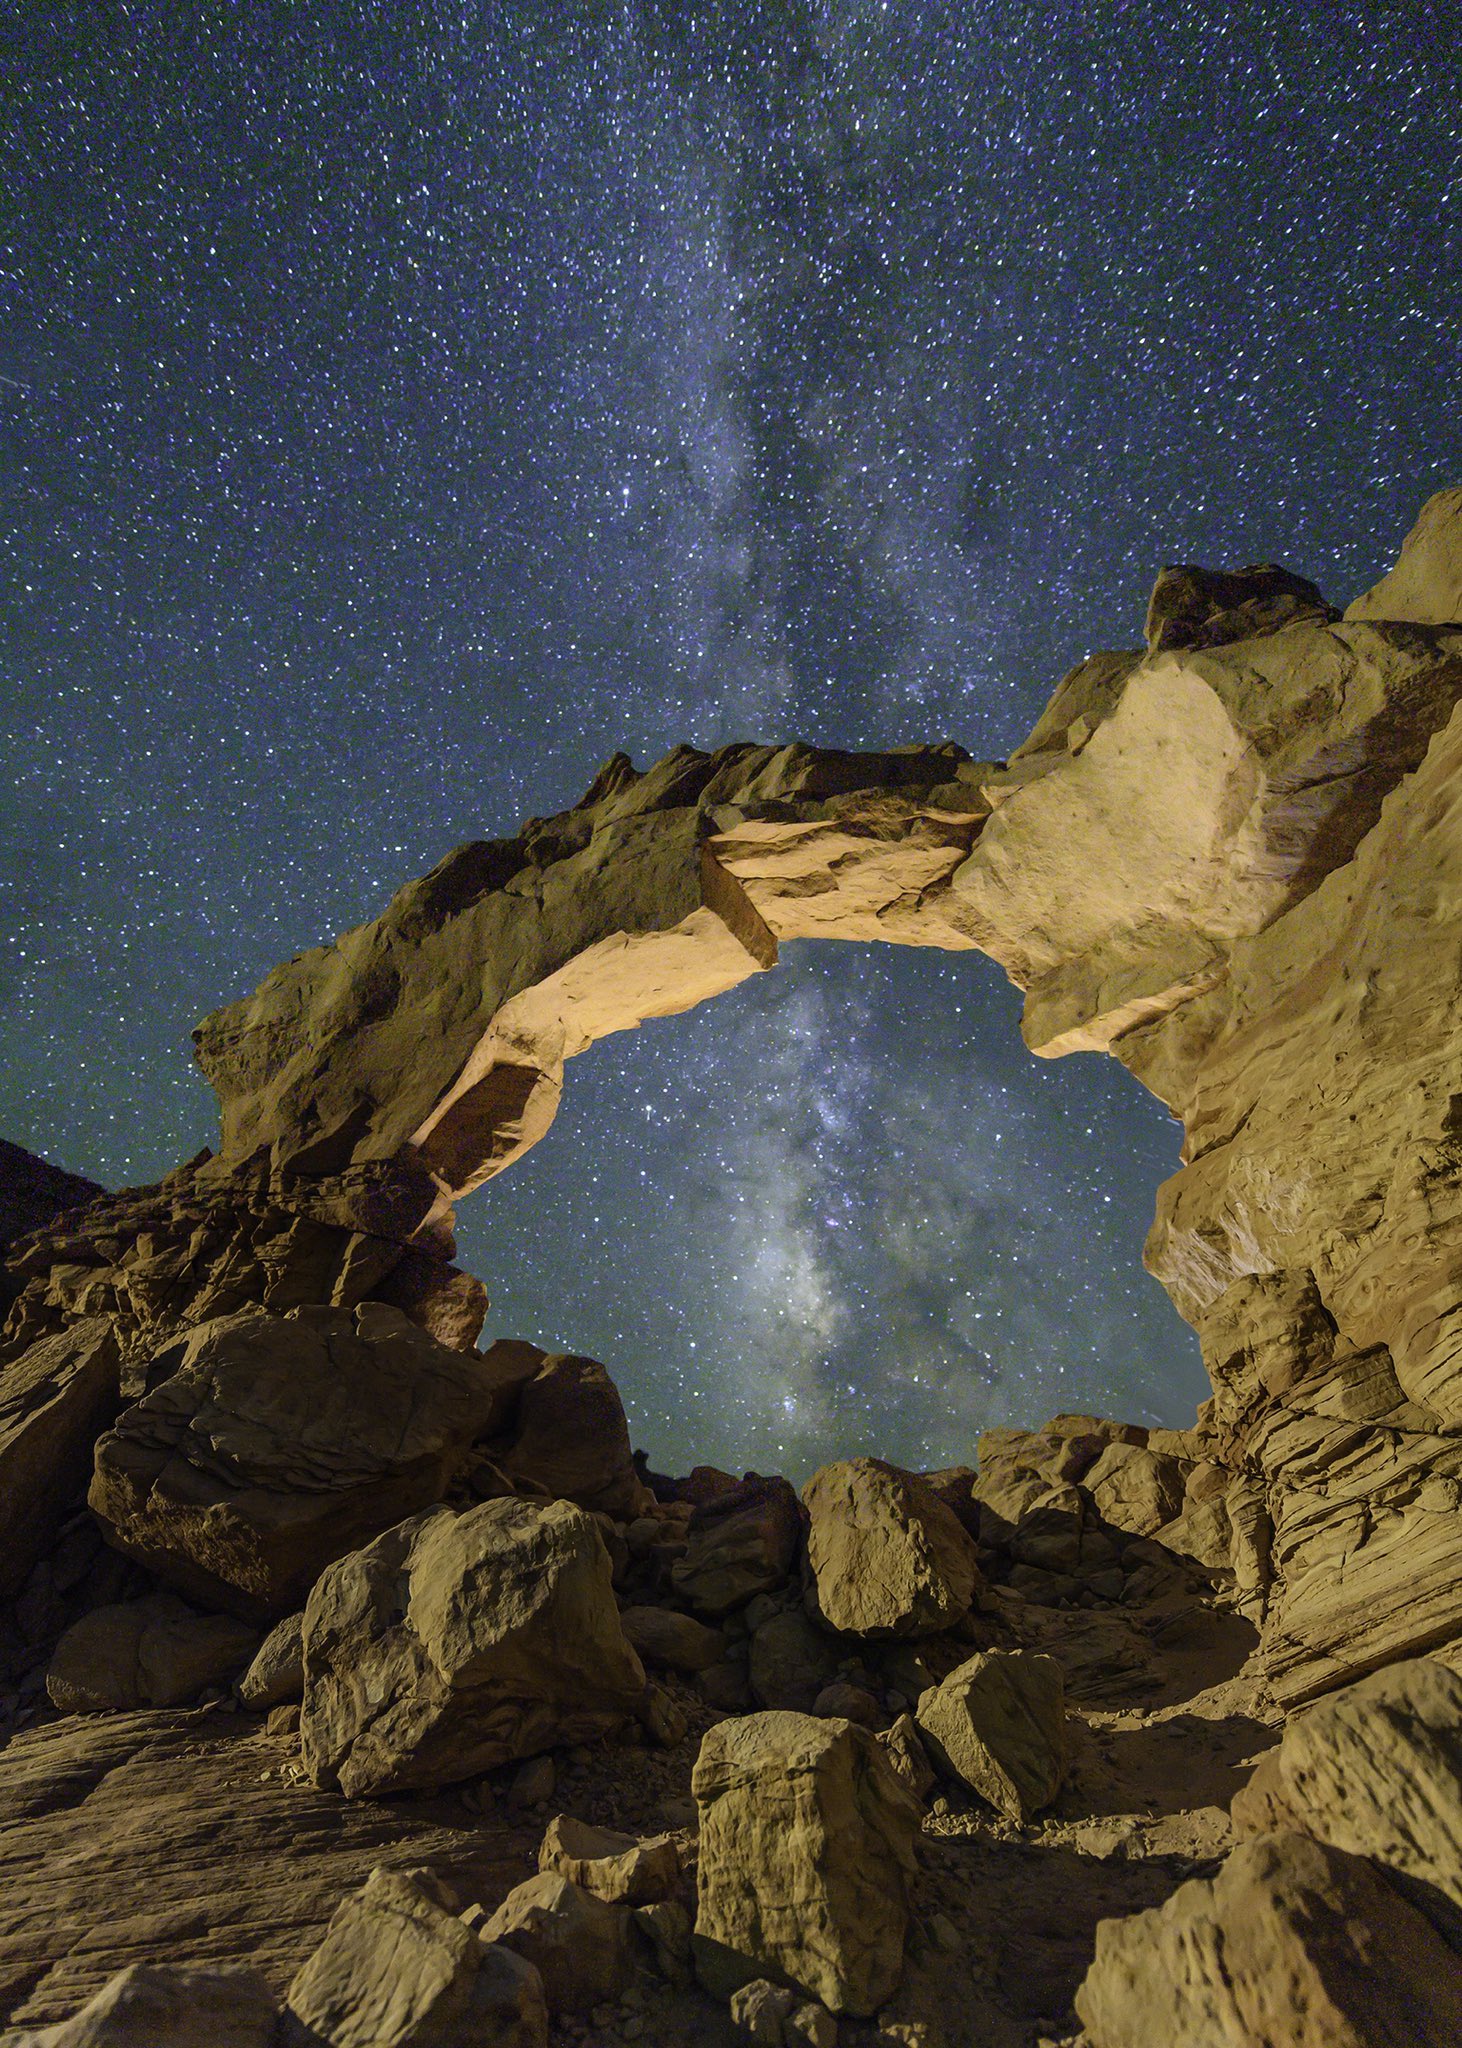 3rd Place An arch in Utah with the Milky Way Laura Hedien- Storm Clouds Photography @lhedien